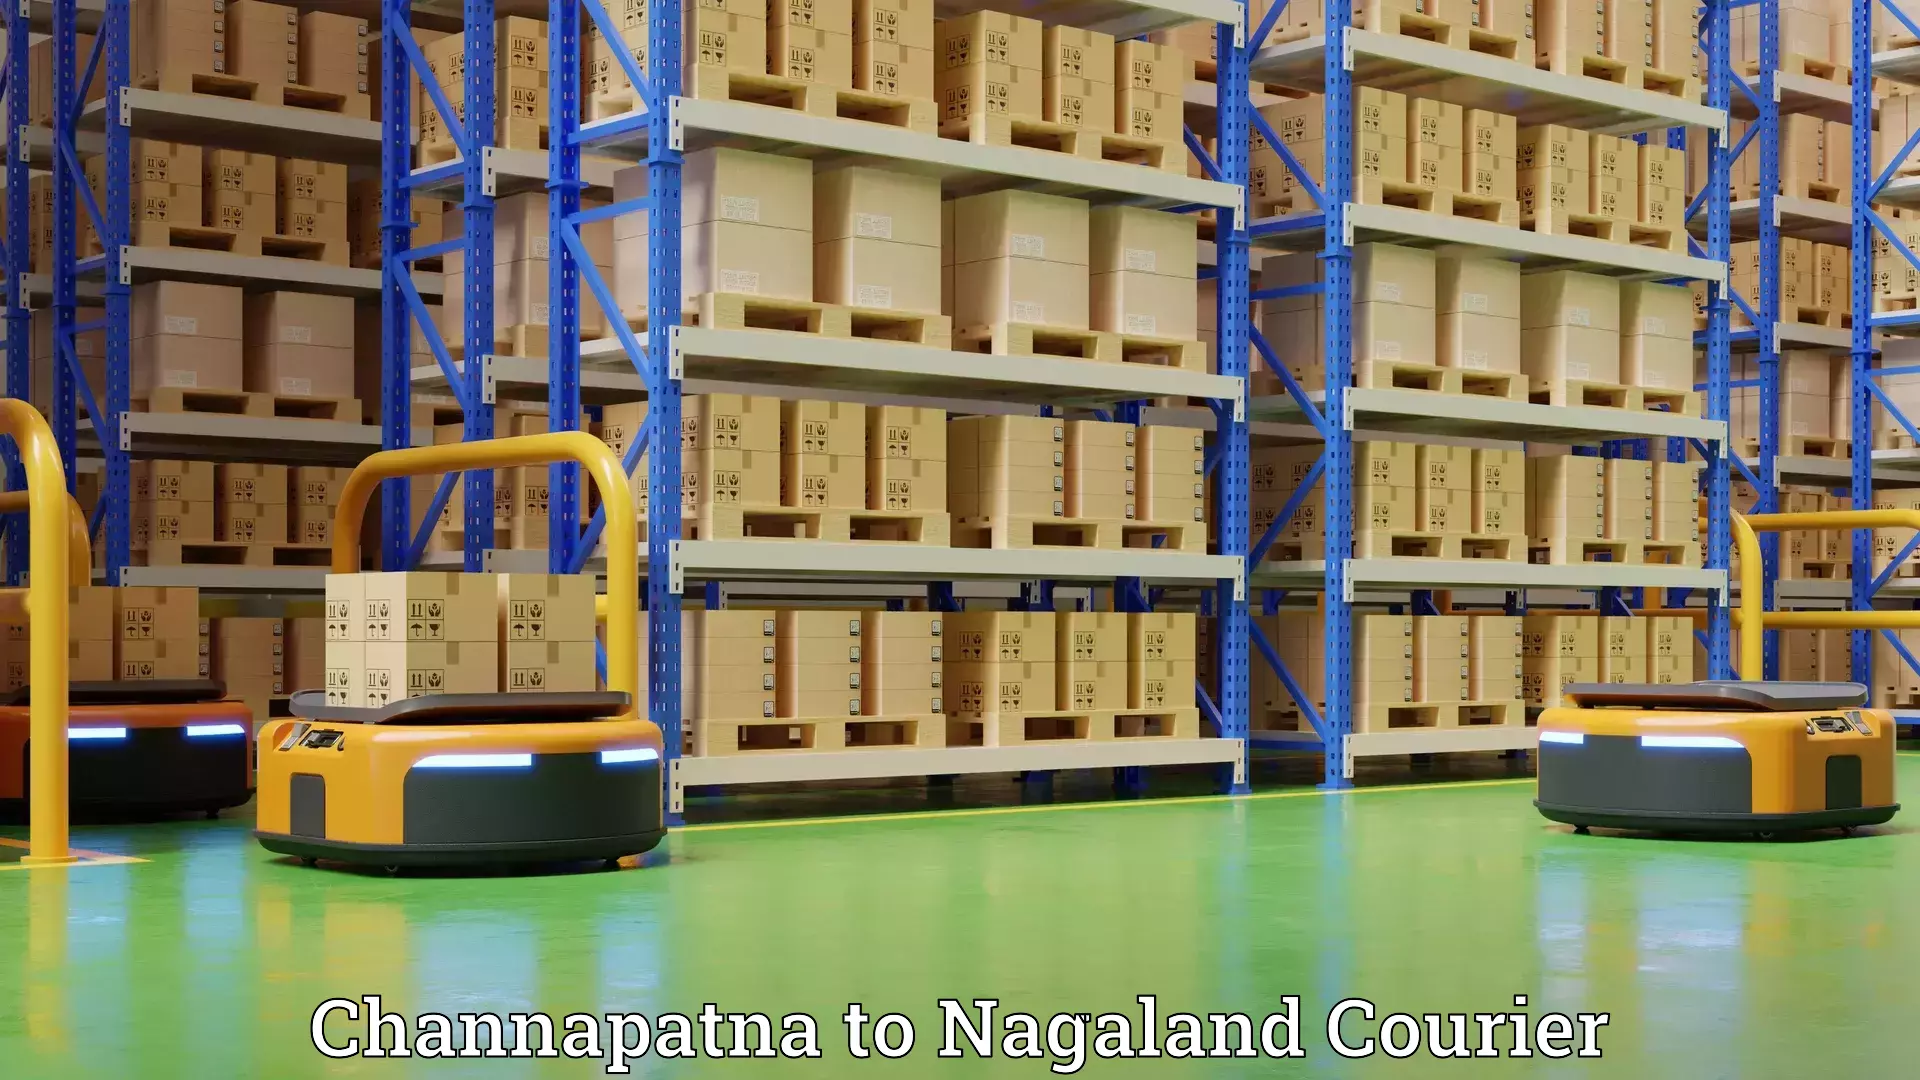 Quality relocation services Channapatna to Nagaland